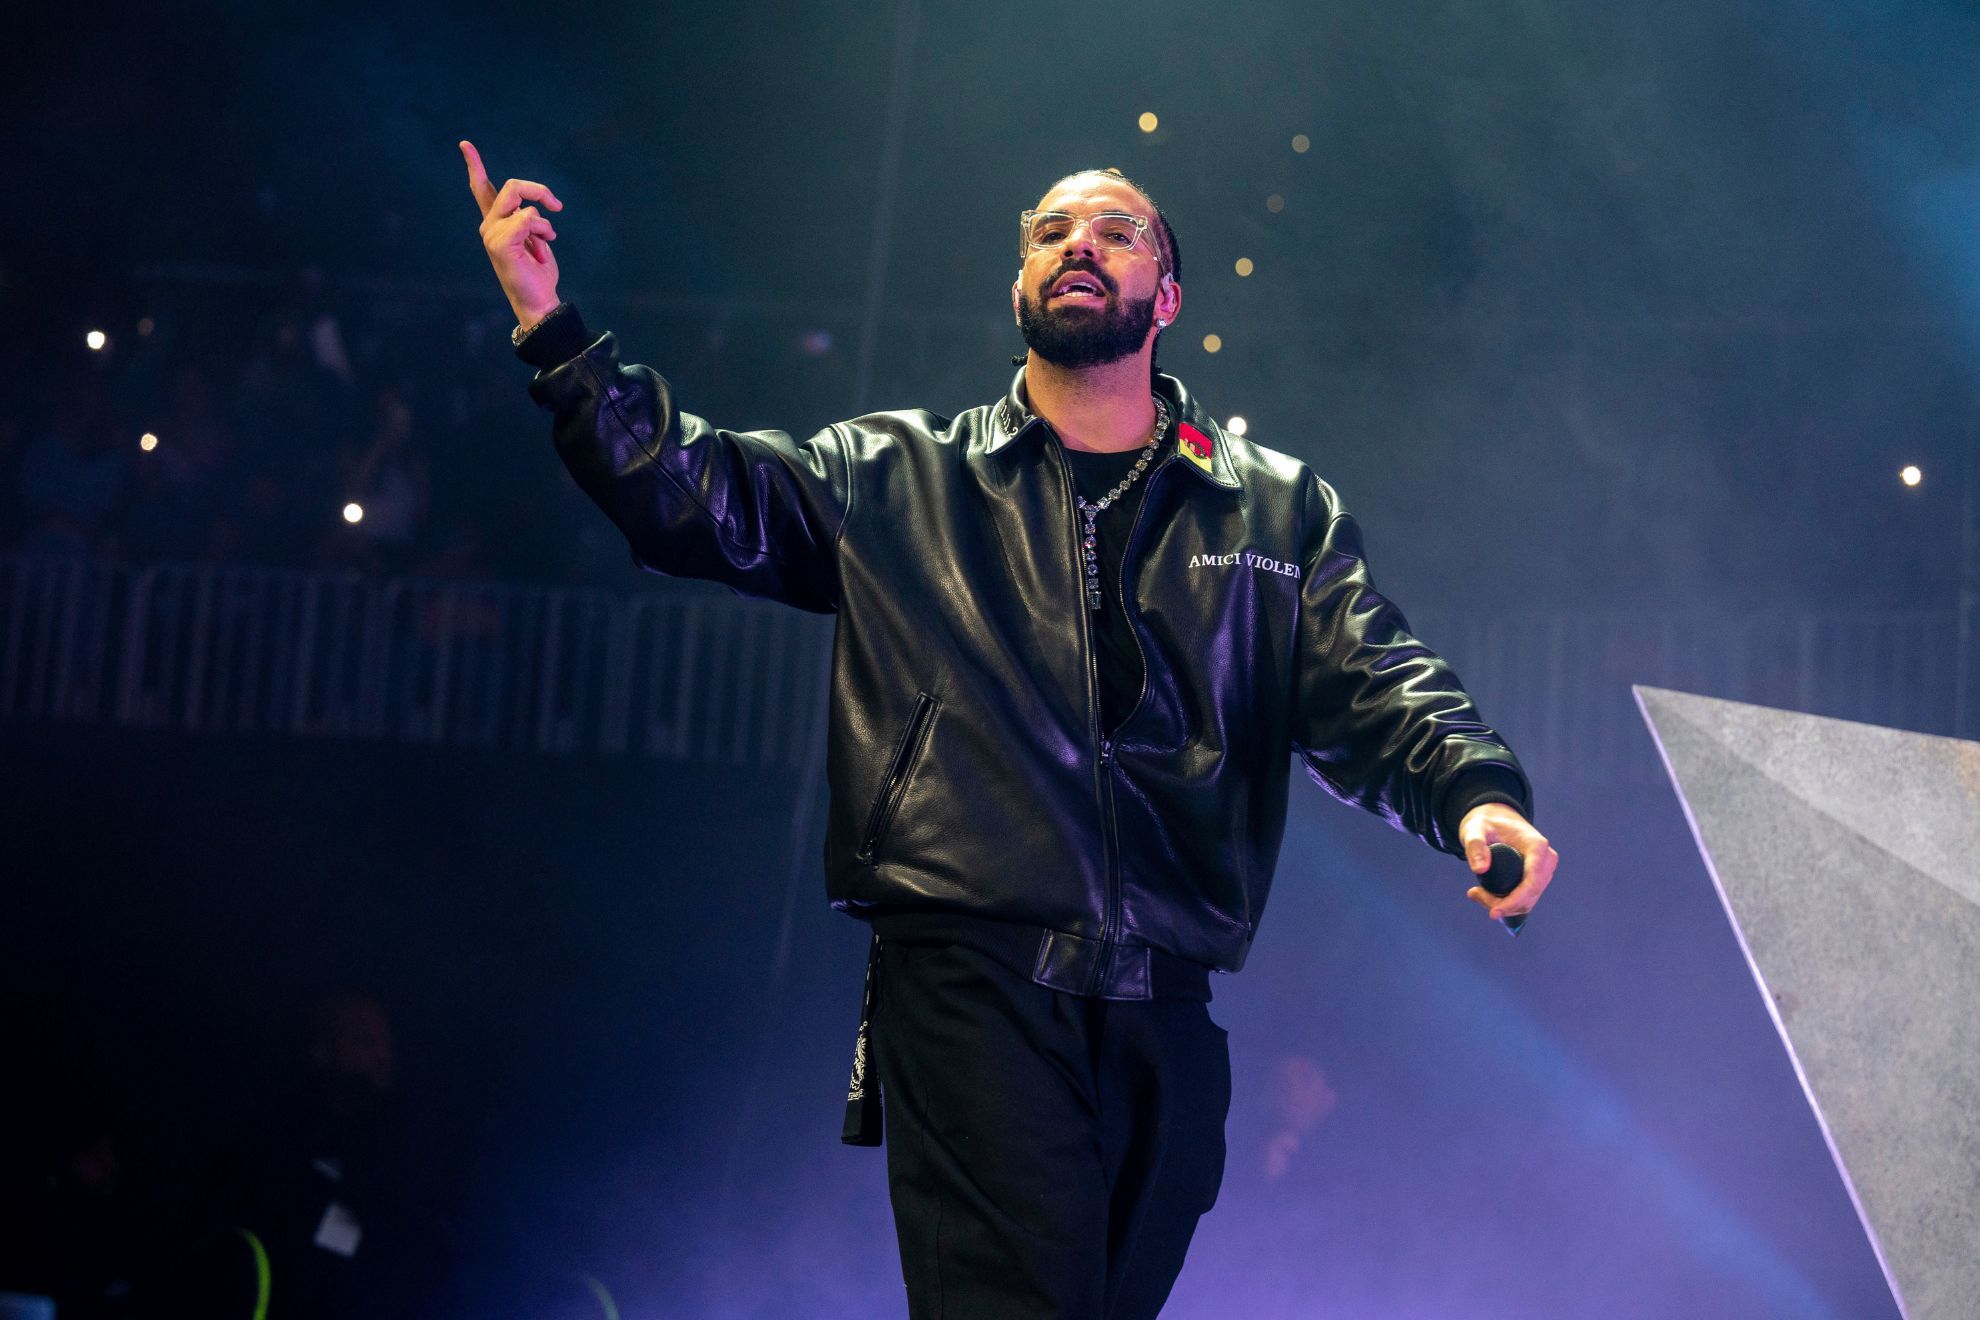 Drake Gifts Pregnant Fan $25,000 During His Concert